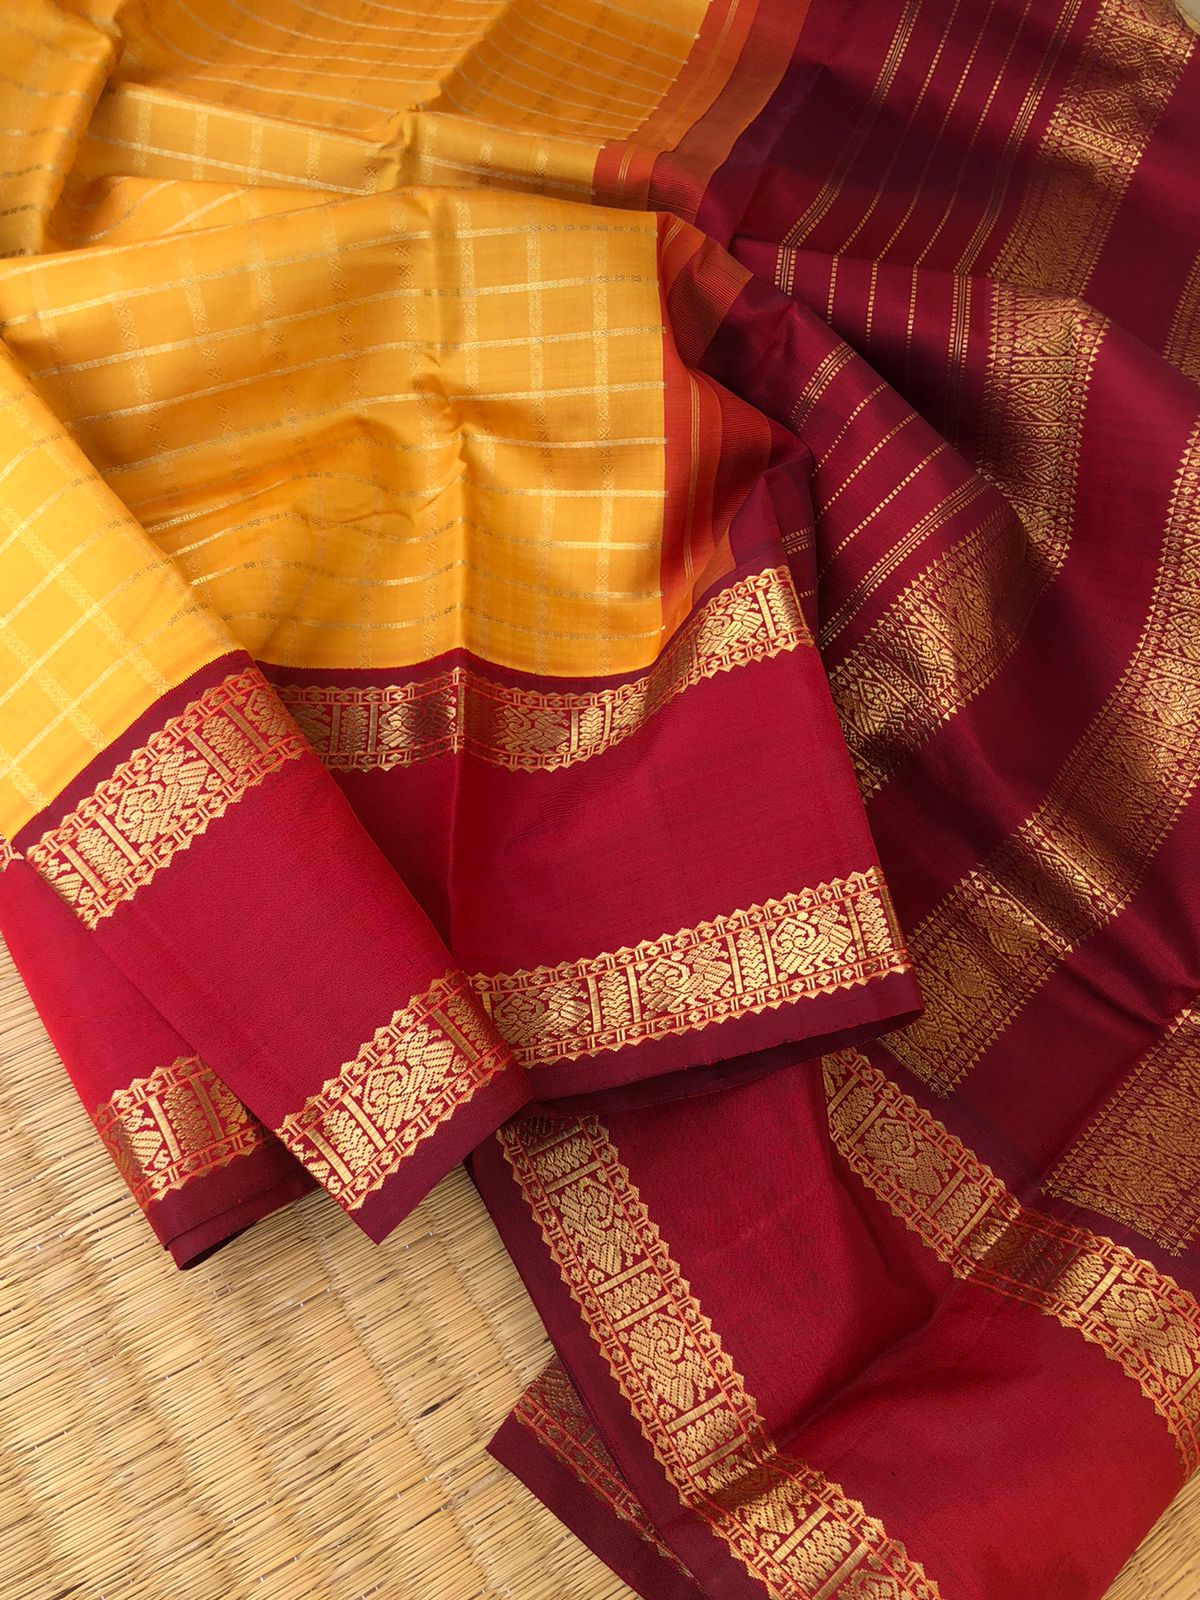 Vintage Ragas on Kanchivaram - the traditional at the best of classy mustard red and maroon with thutripoo woven chex with korvai woven retta pett borders